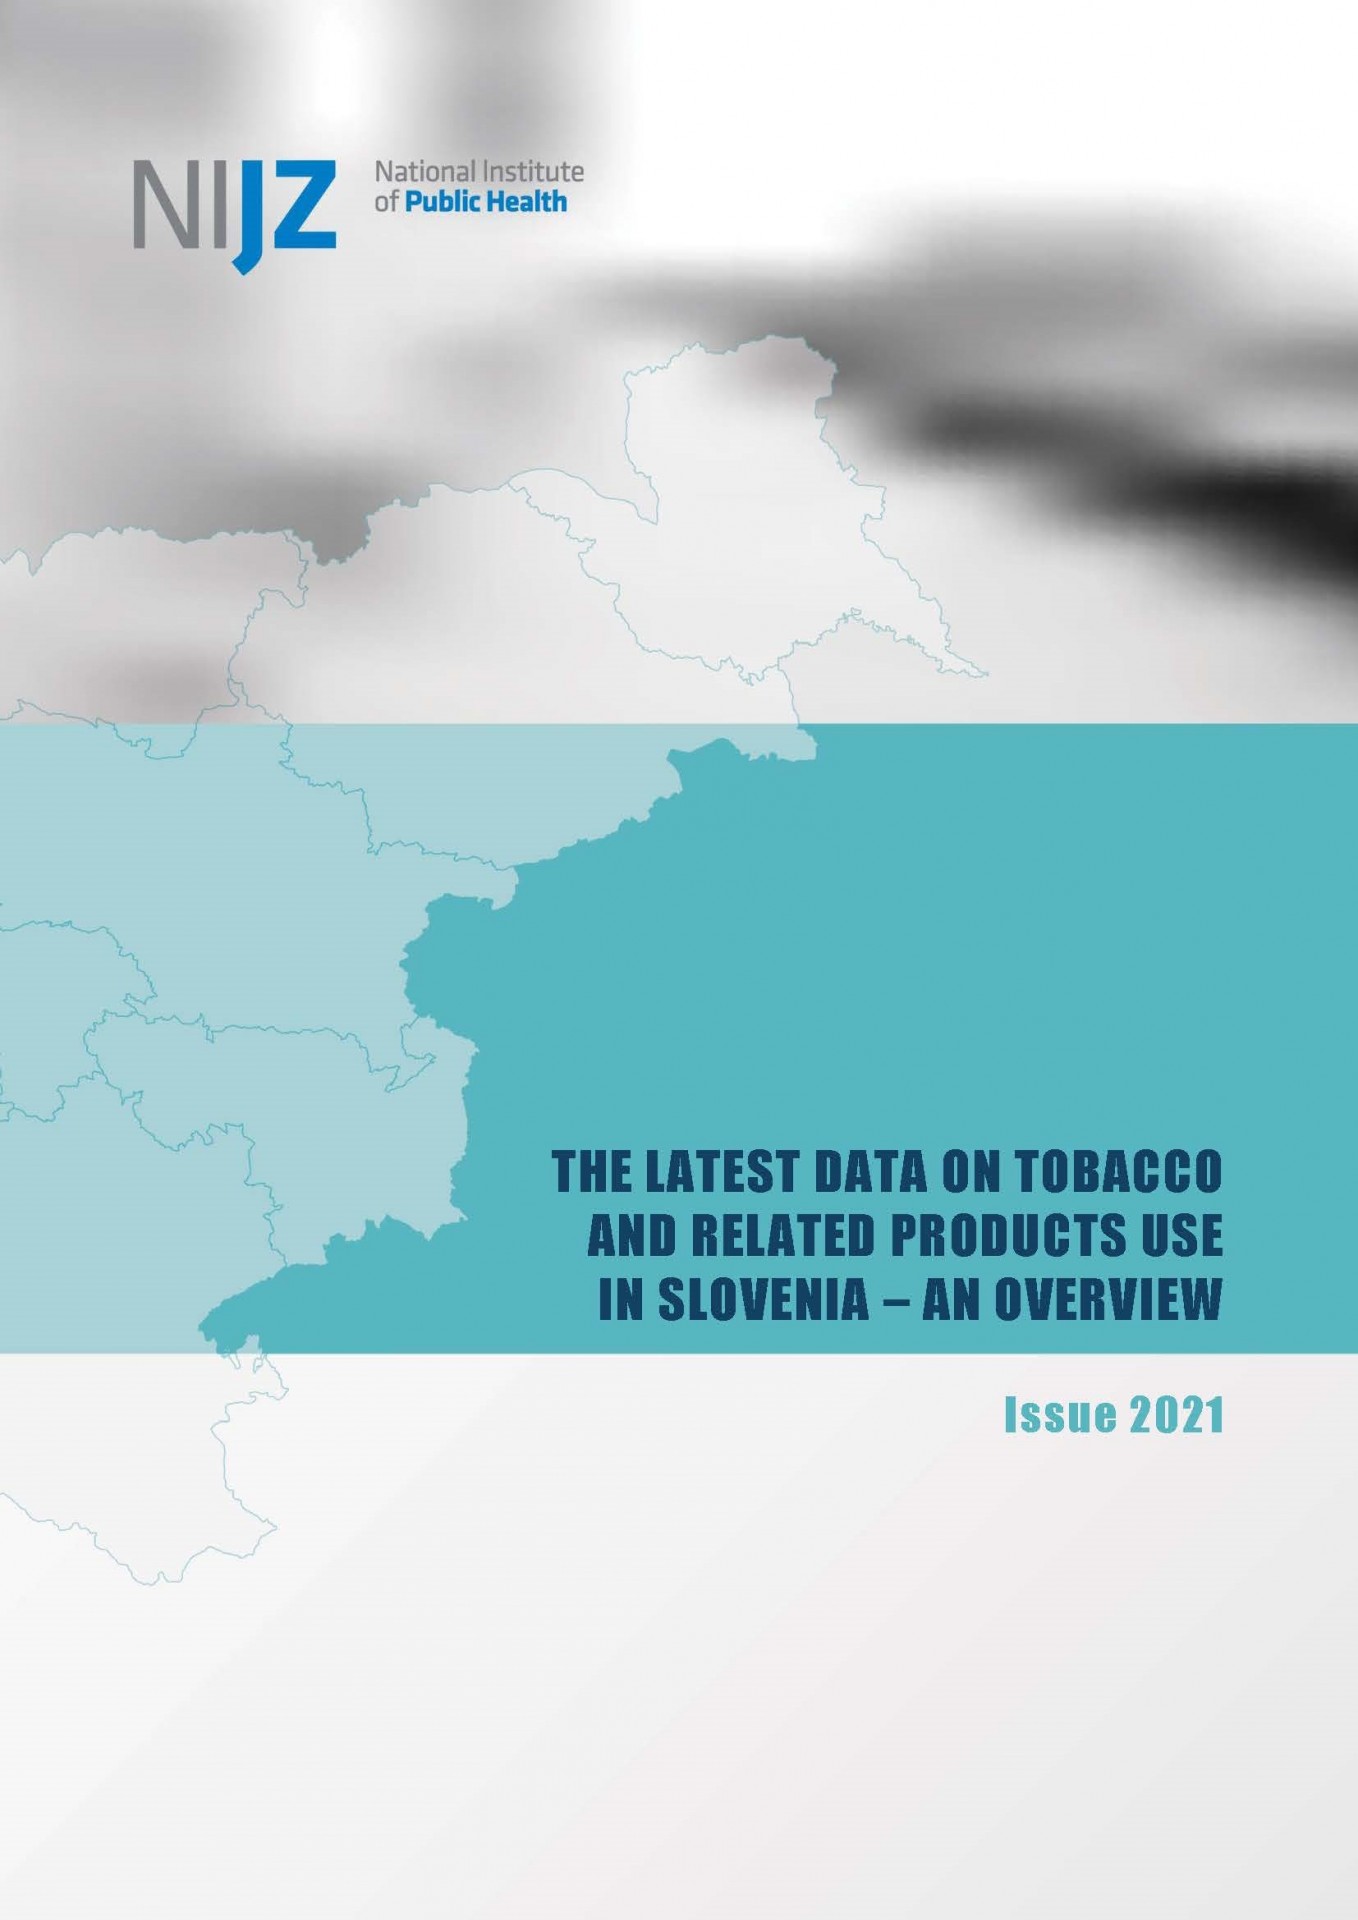 The latest data on tobacco and related products use in Slovenia – an overview